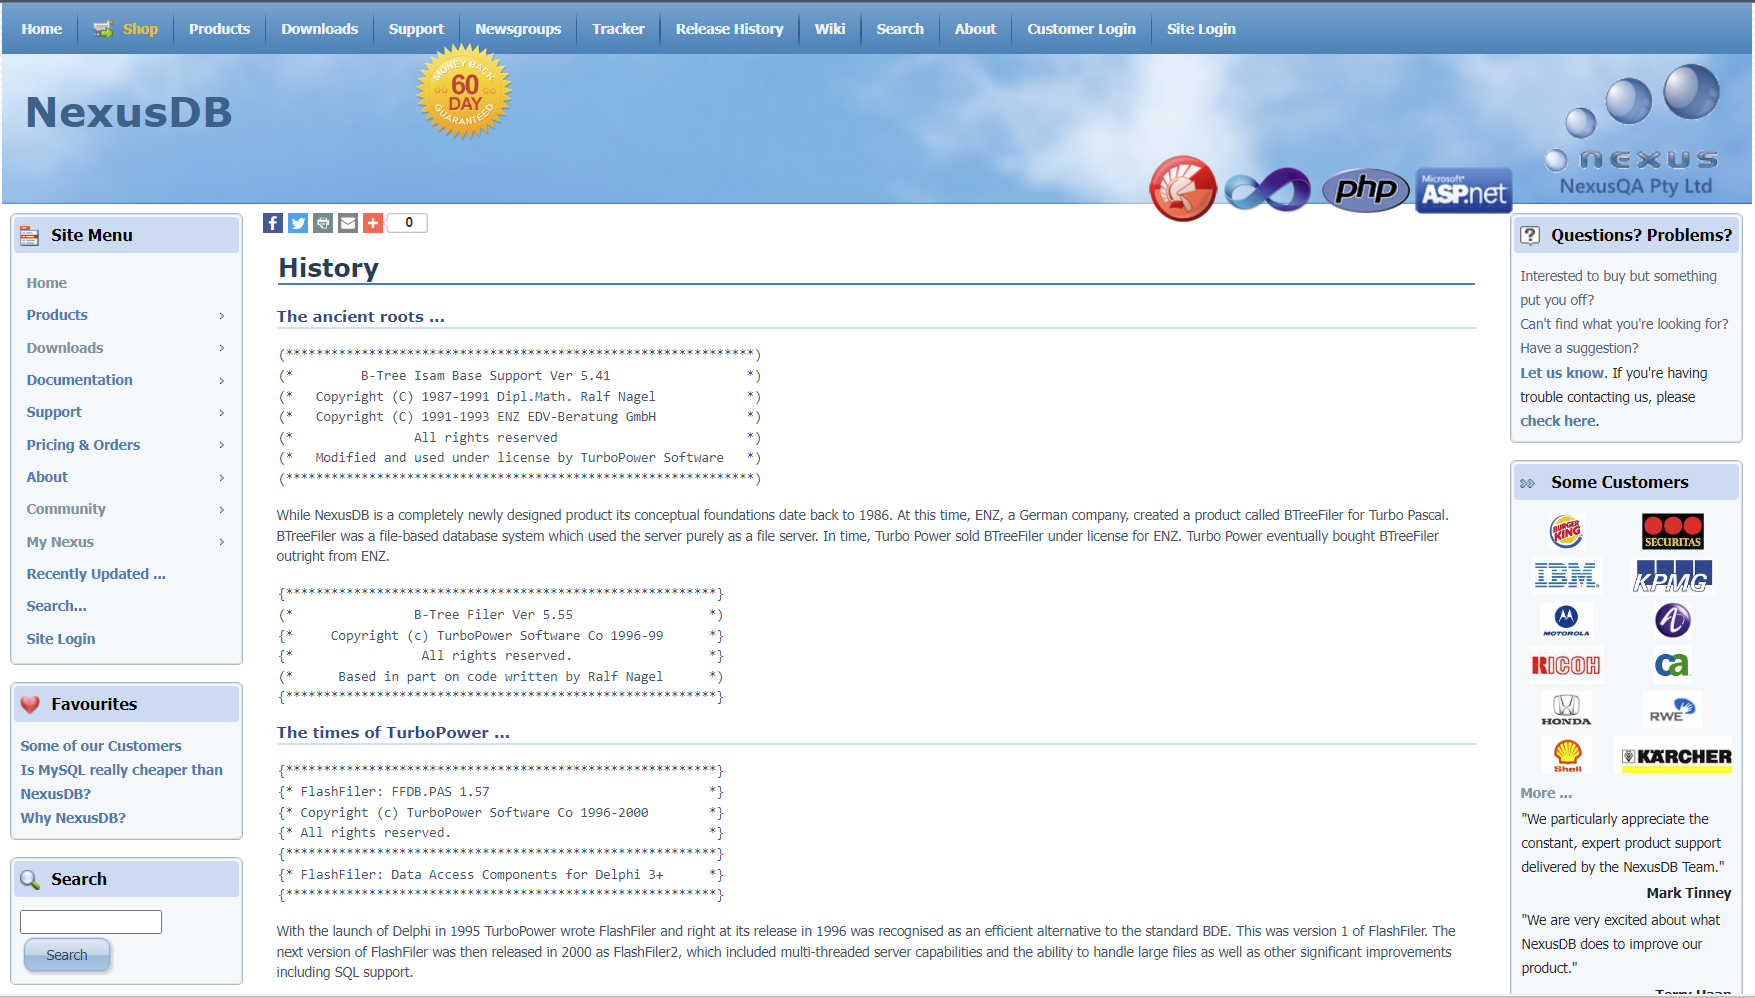 A screenshot of the NexusDB Website - It looks straight out of 2005